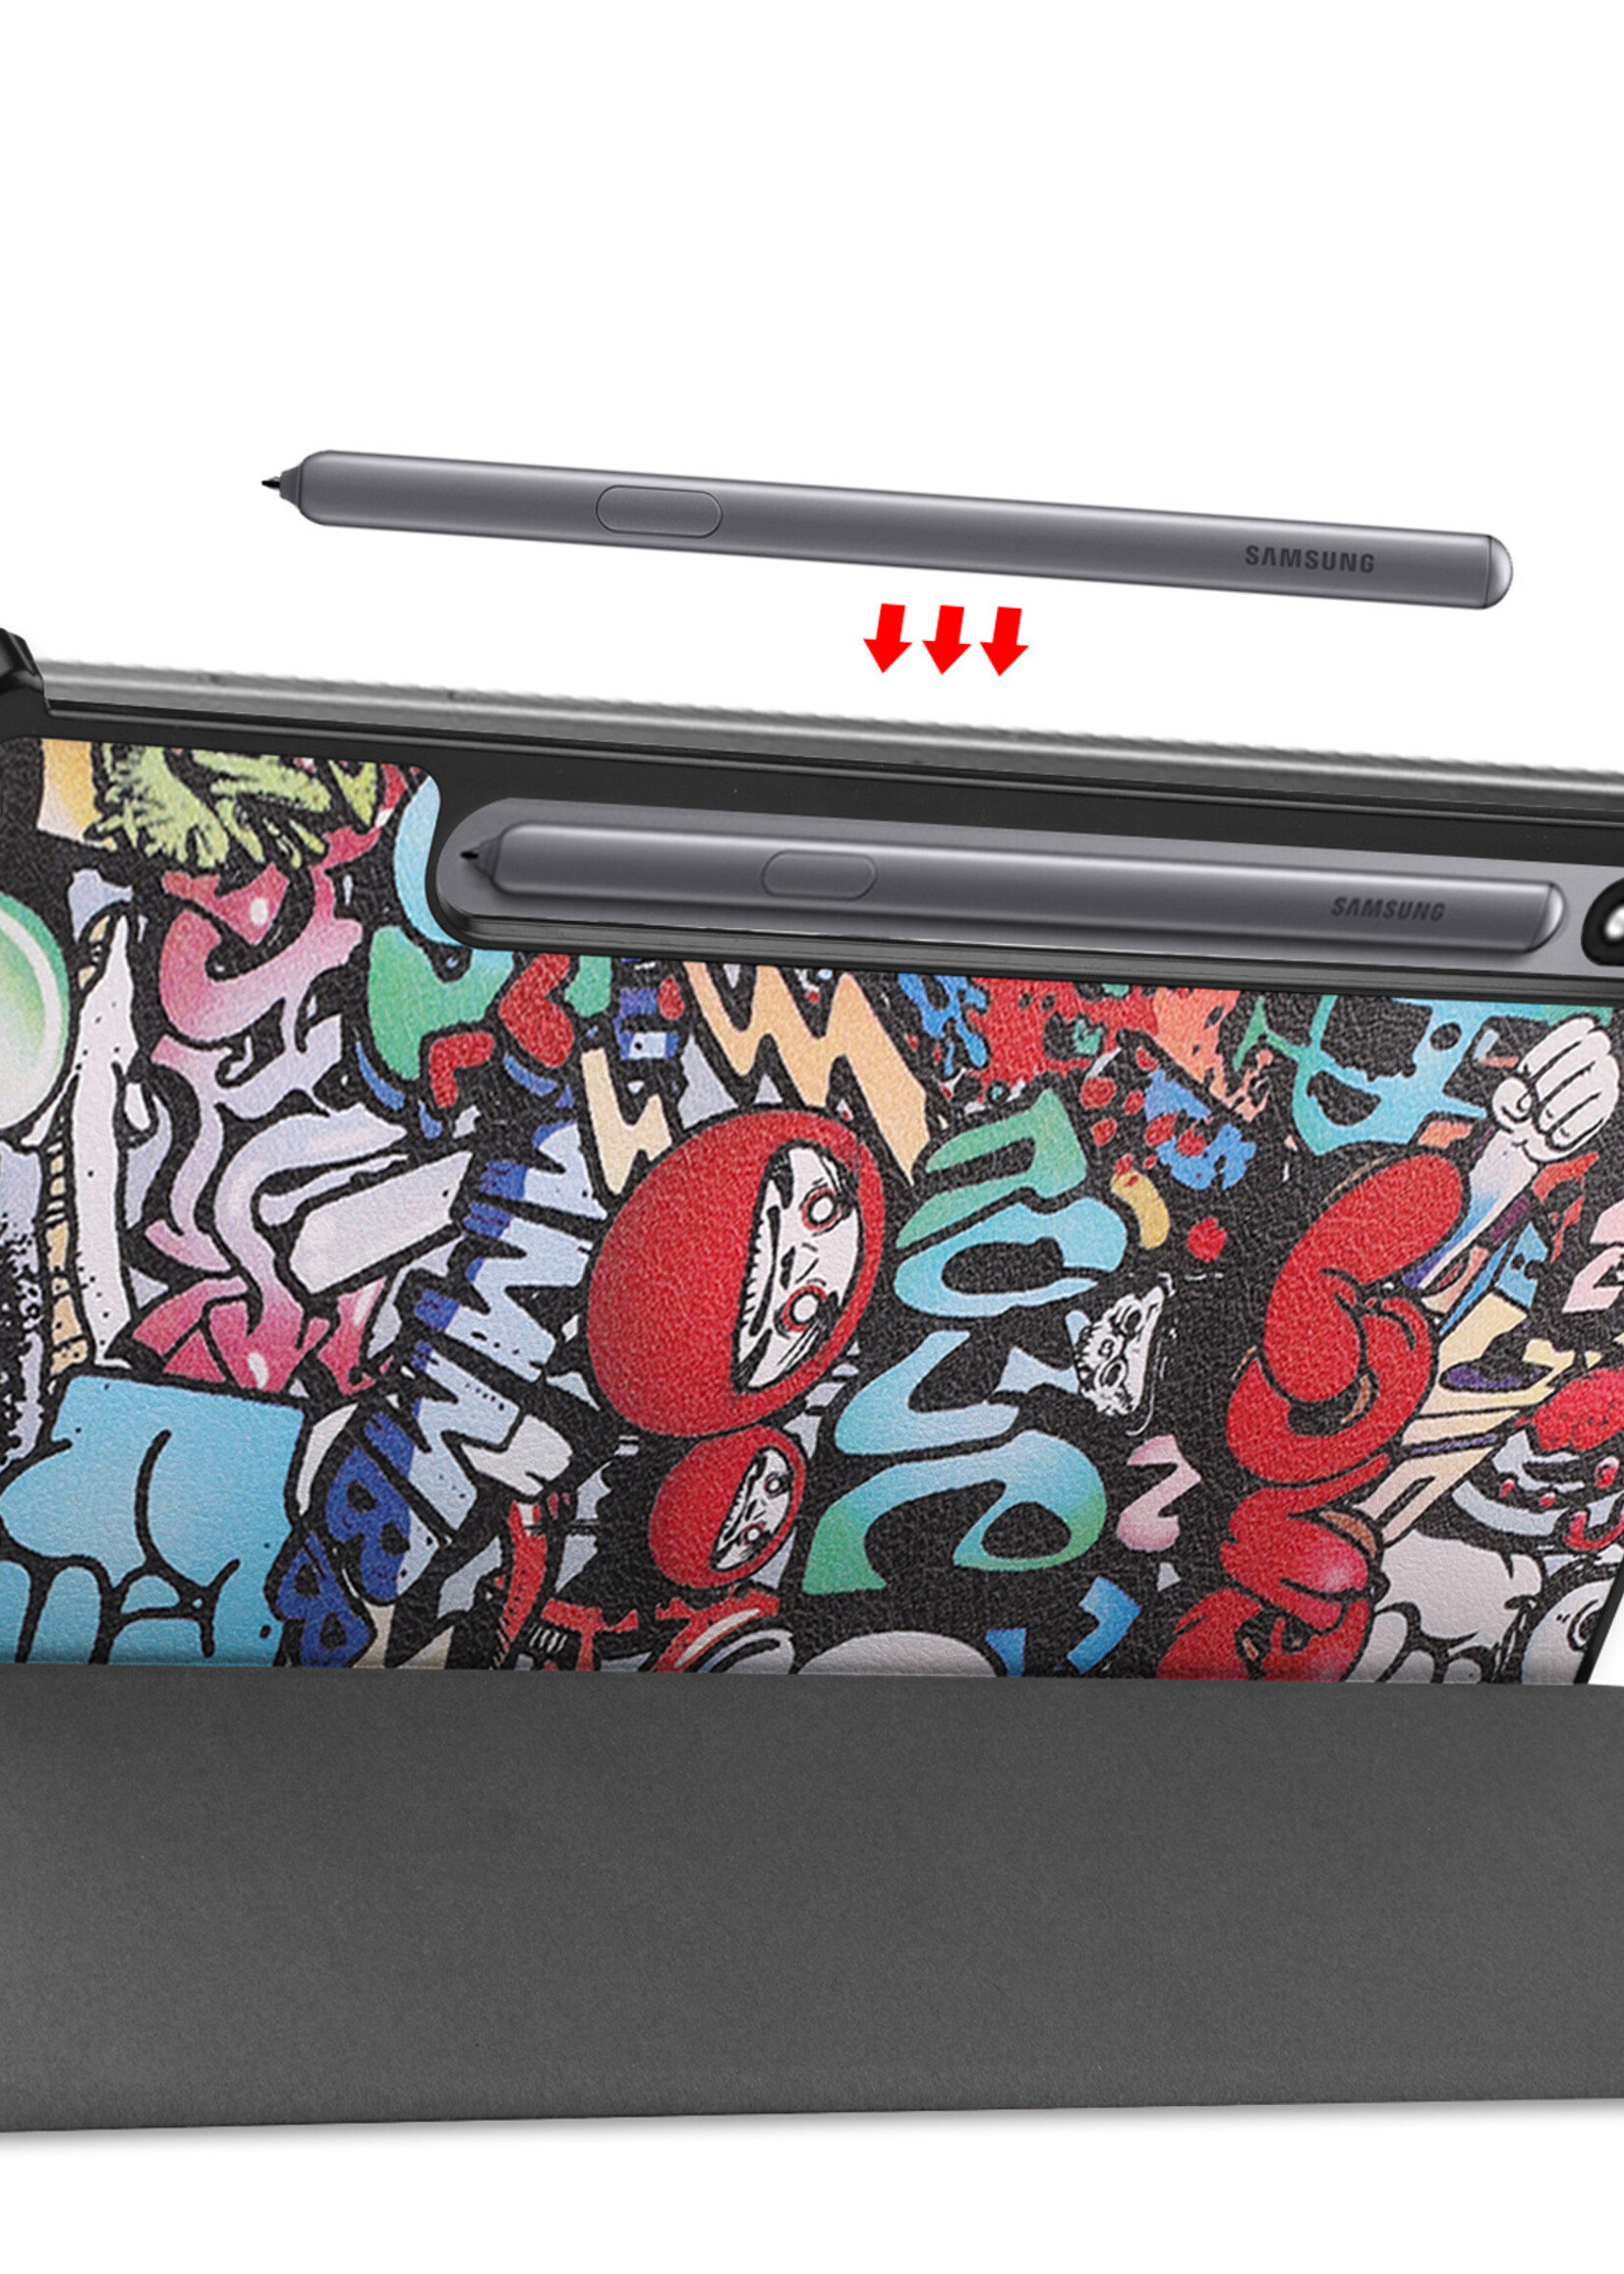 BTH Samsung Tab S8 Hoes Book Case Hoesje Met S Pen Uitsparing - Samsung Galaxy Tab S8 Hoesje Cover - Graffity